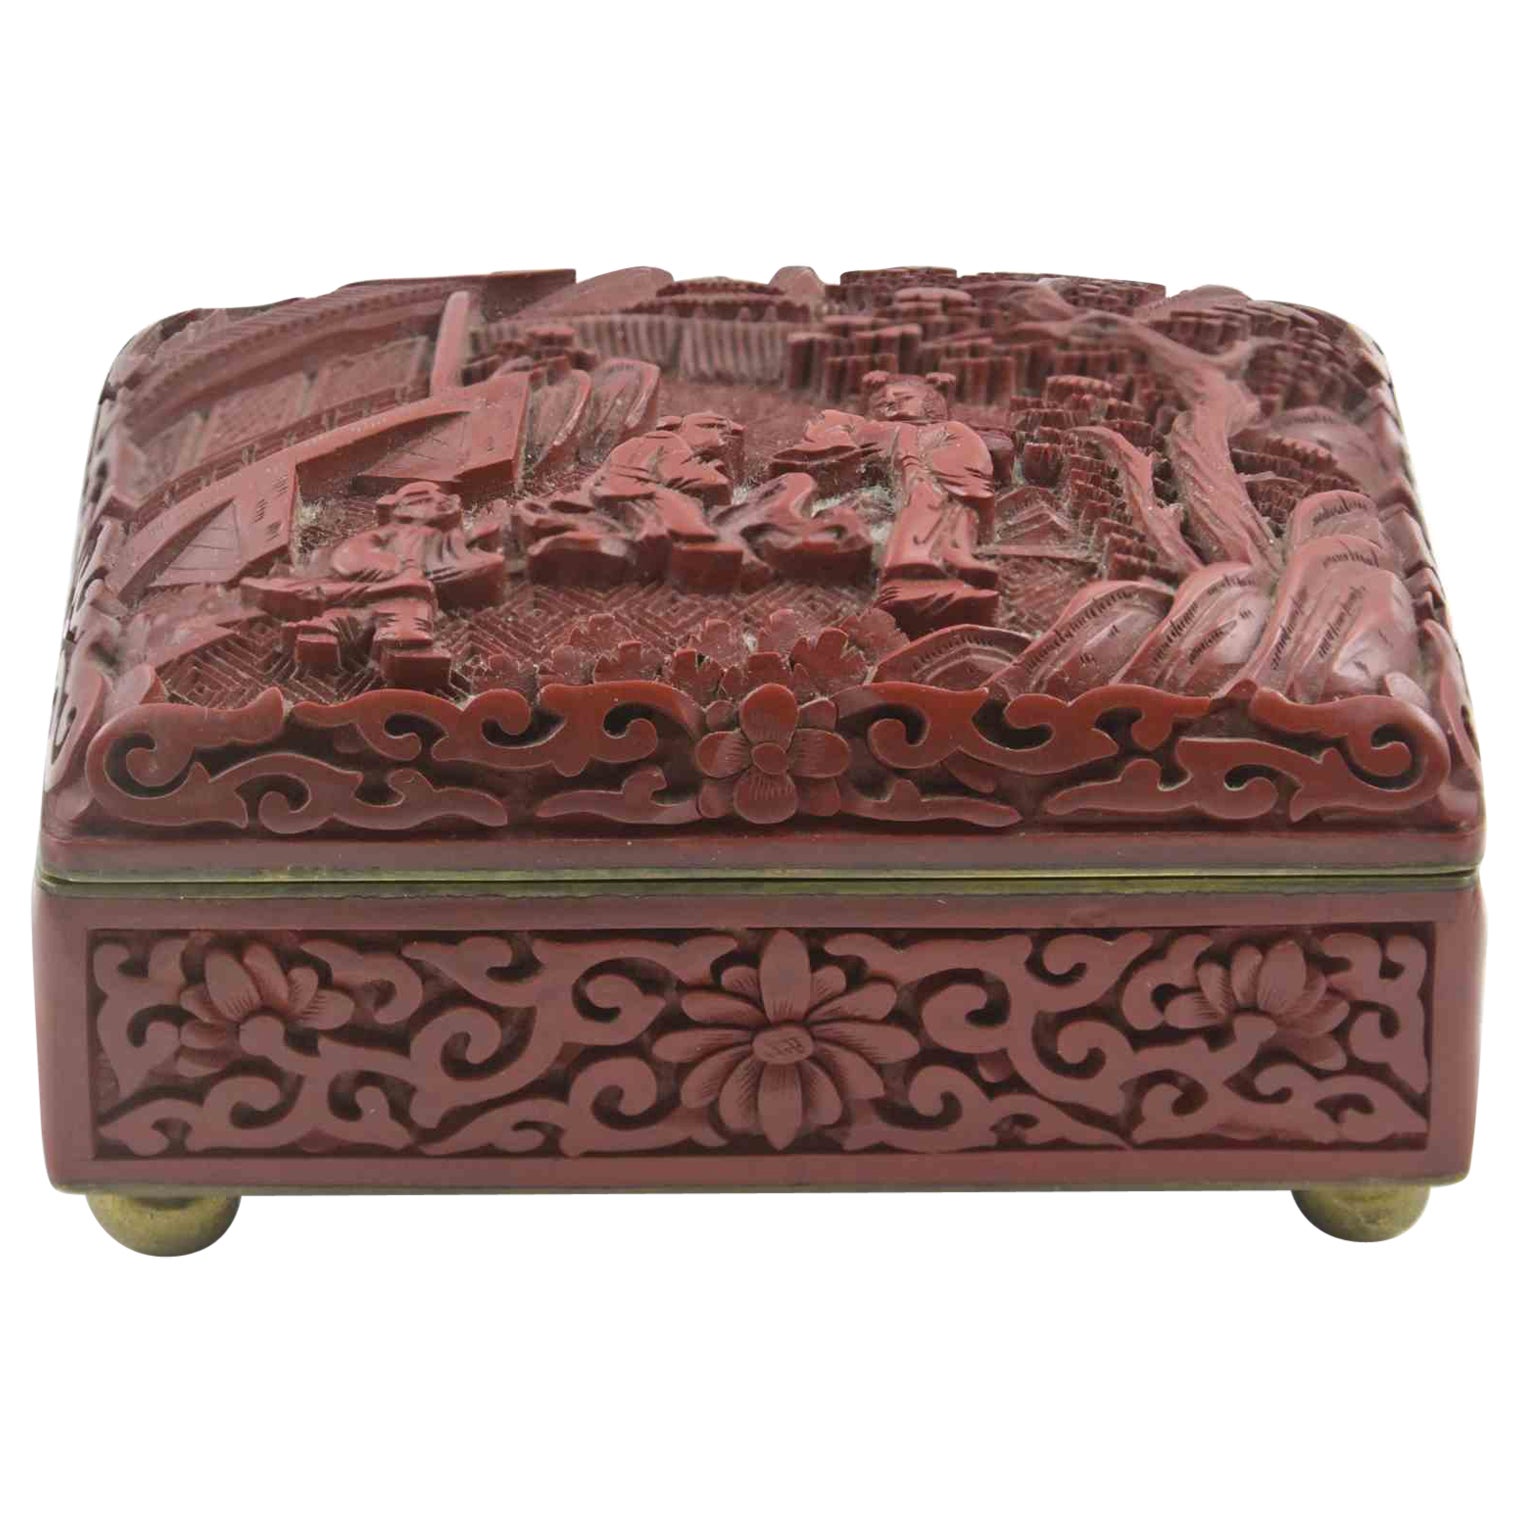 Vintage Chinese Box in Sealing Wax, China, Mid-20th Century